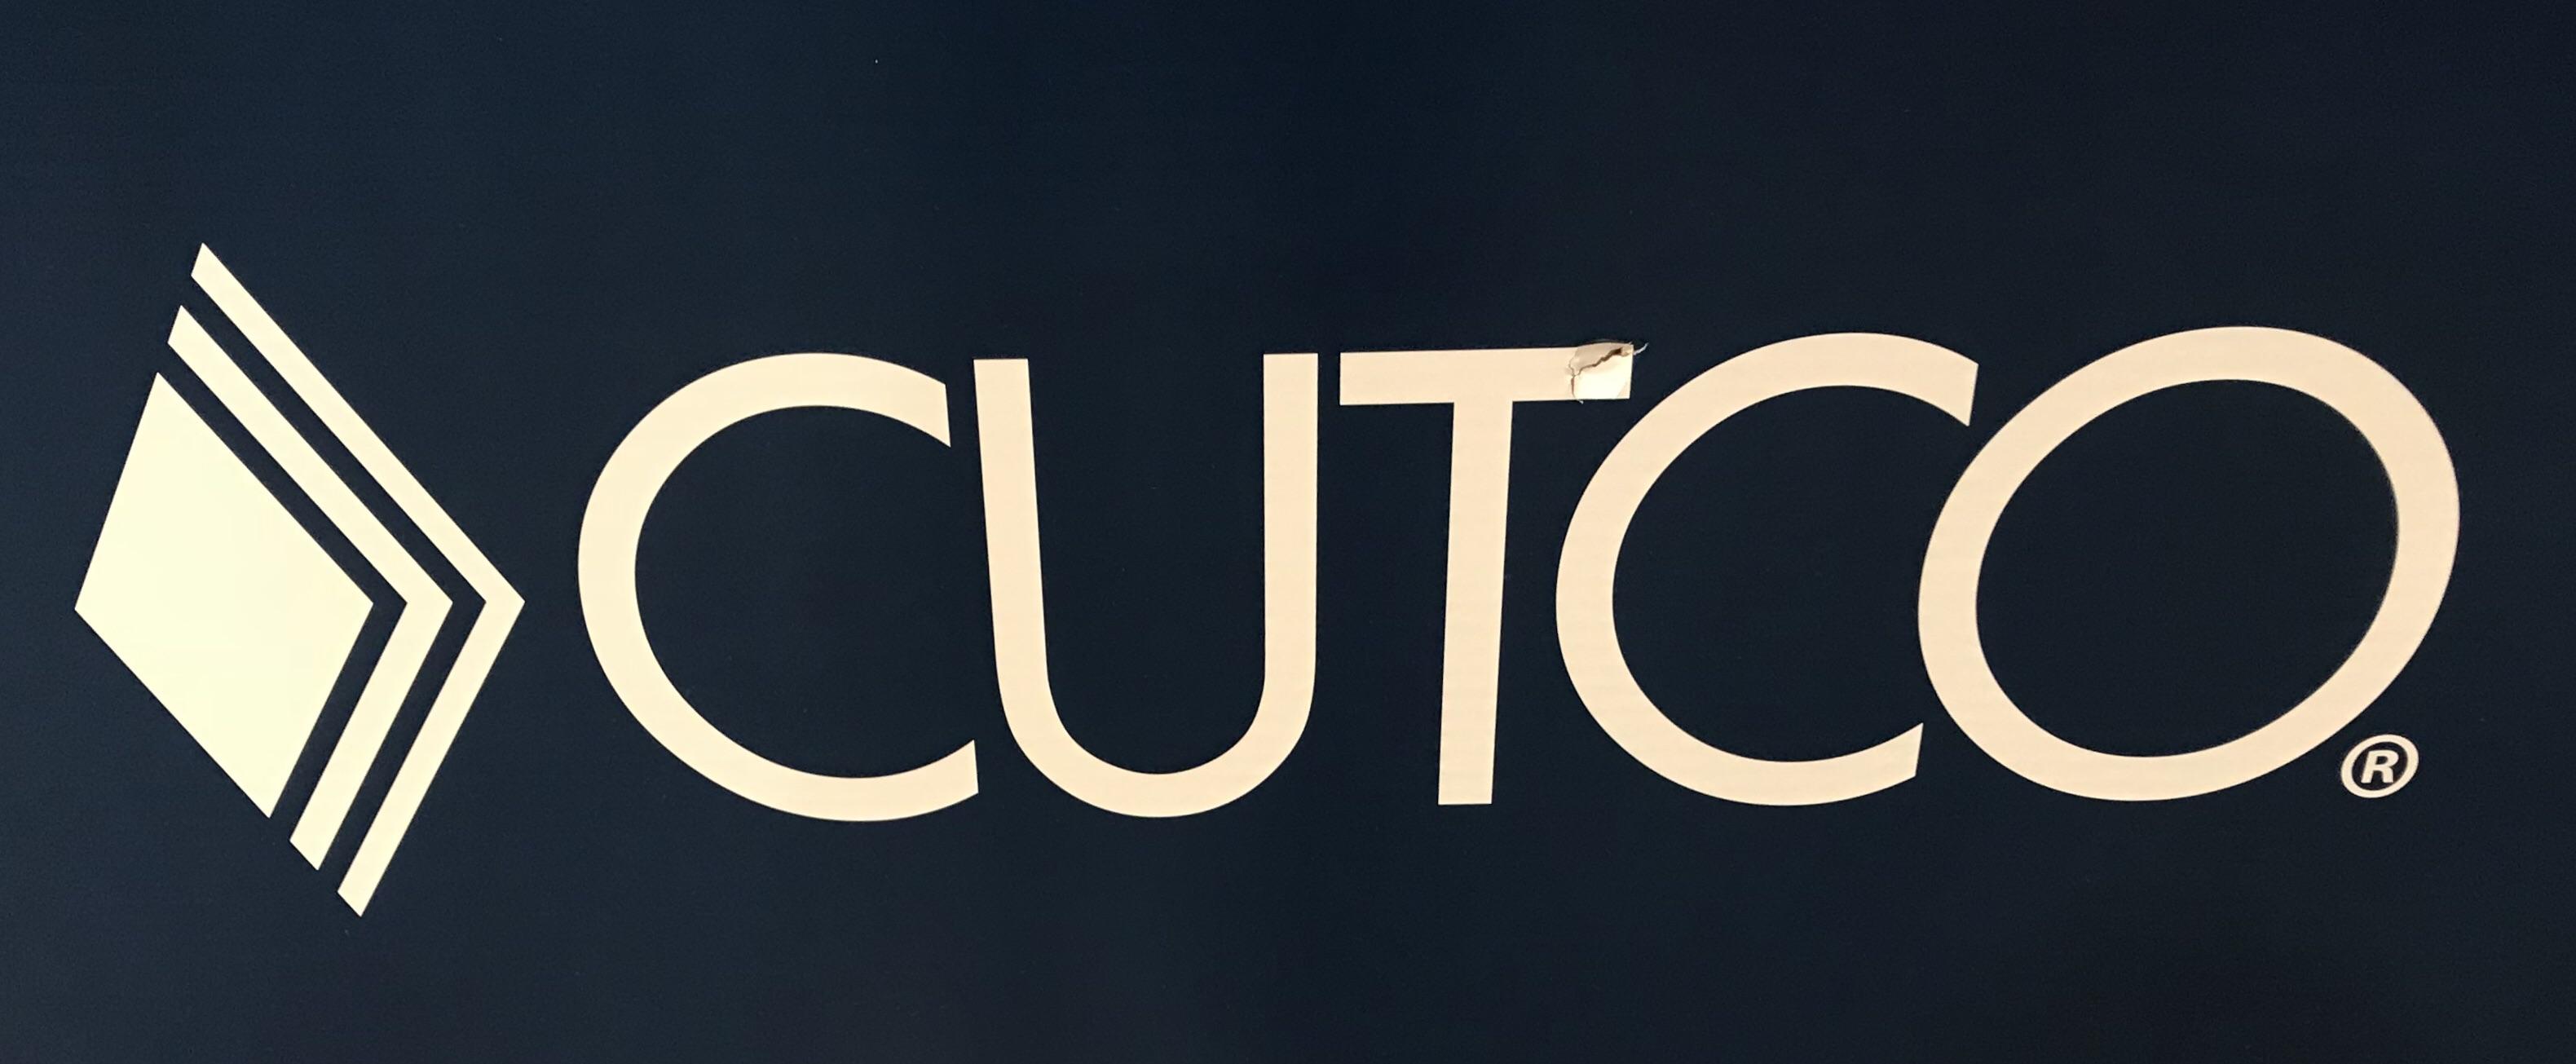 CUTCO Logo - Someone Stole Homer's Suggestion For A Name That's “Cutting Edge